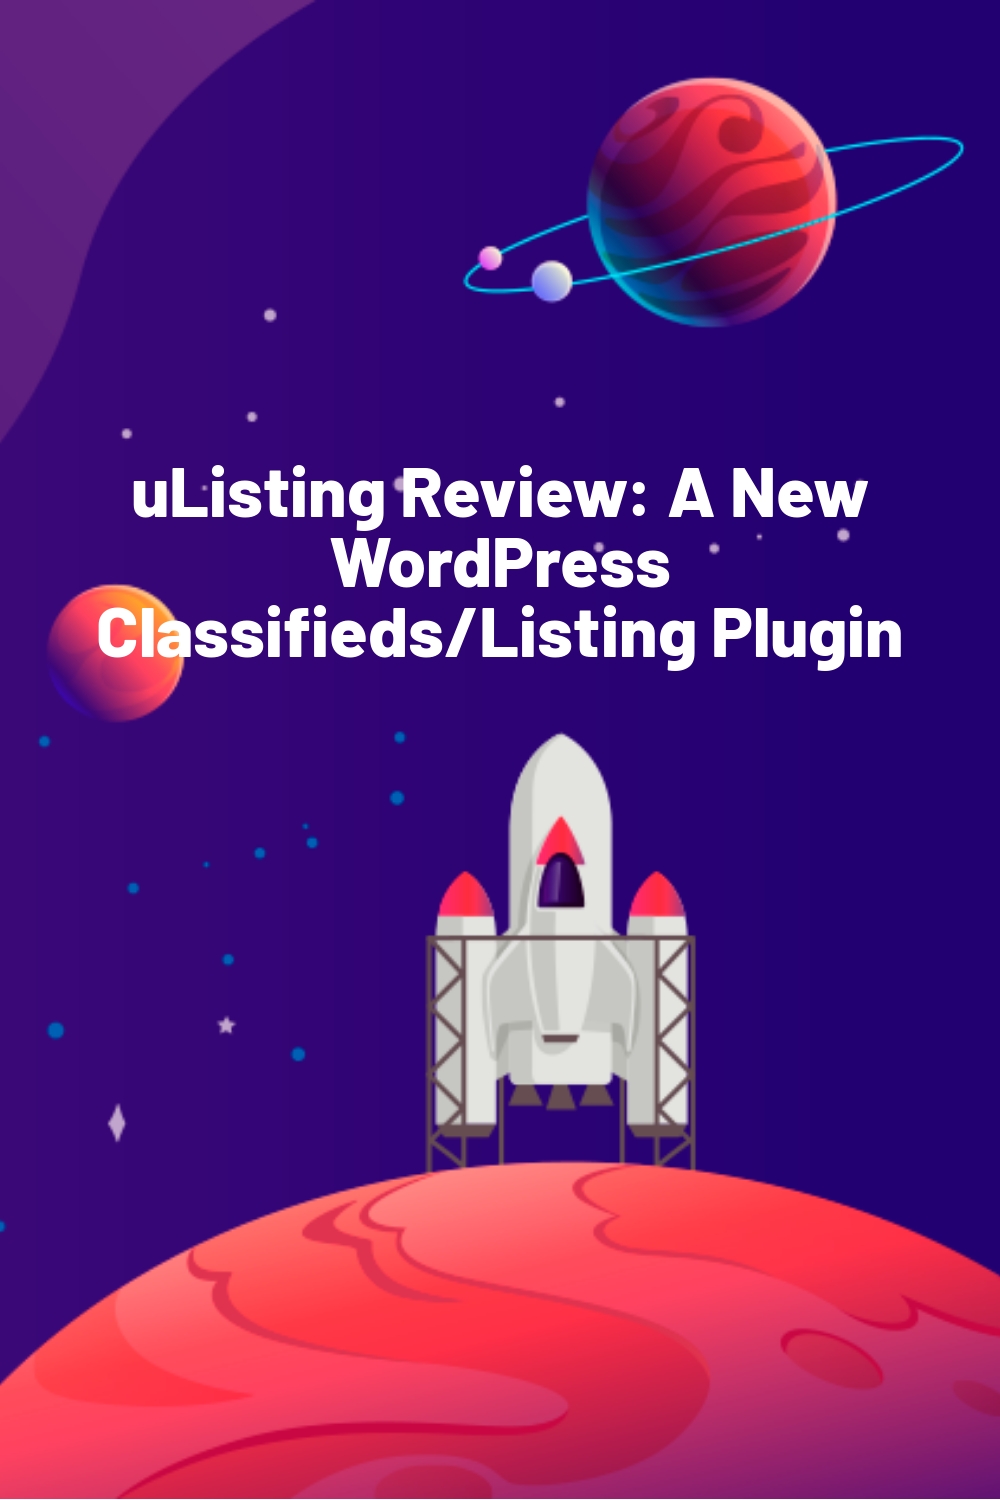 uListing Review: A New WordPress Classifieds/Listing Plugin